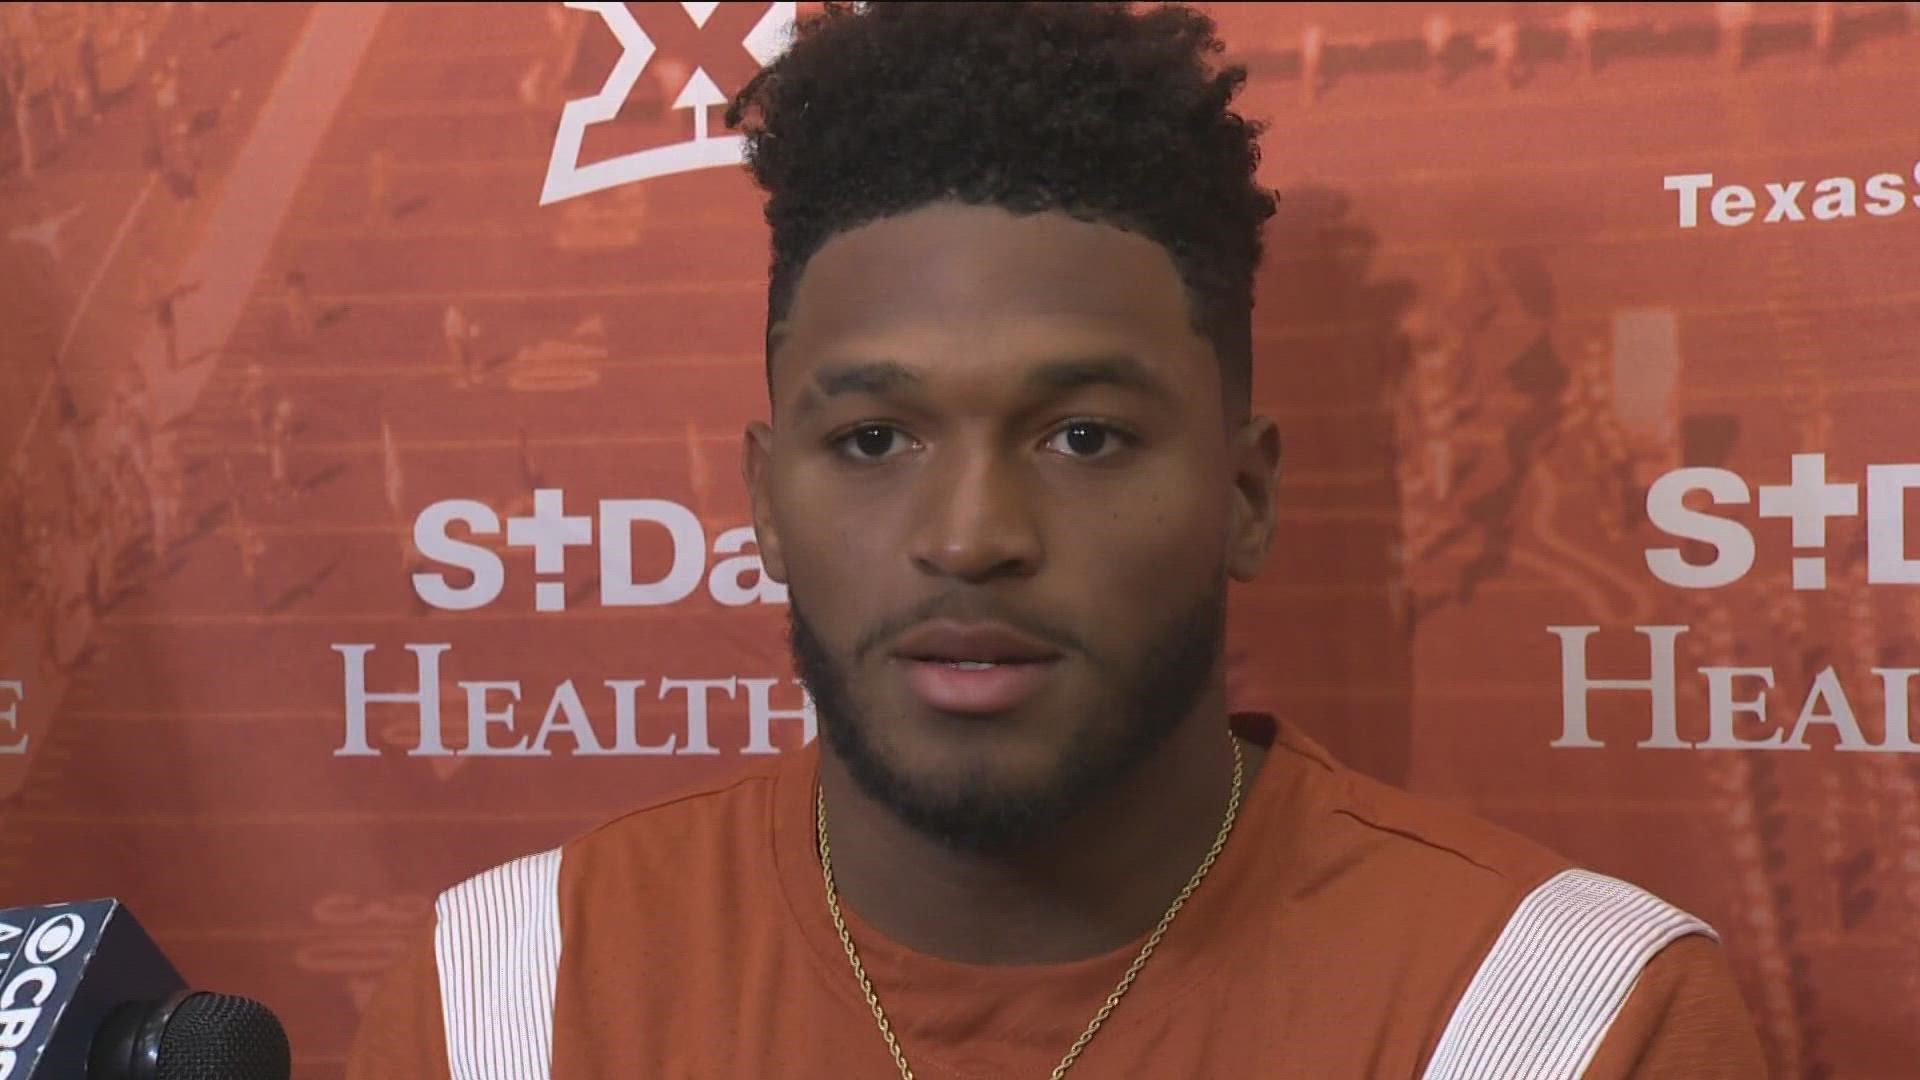 Many called Saturday's game between No. 22 Texas and Iowa State a "trap game" for the Longhorns.